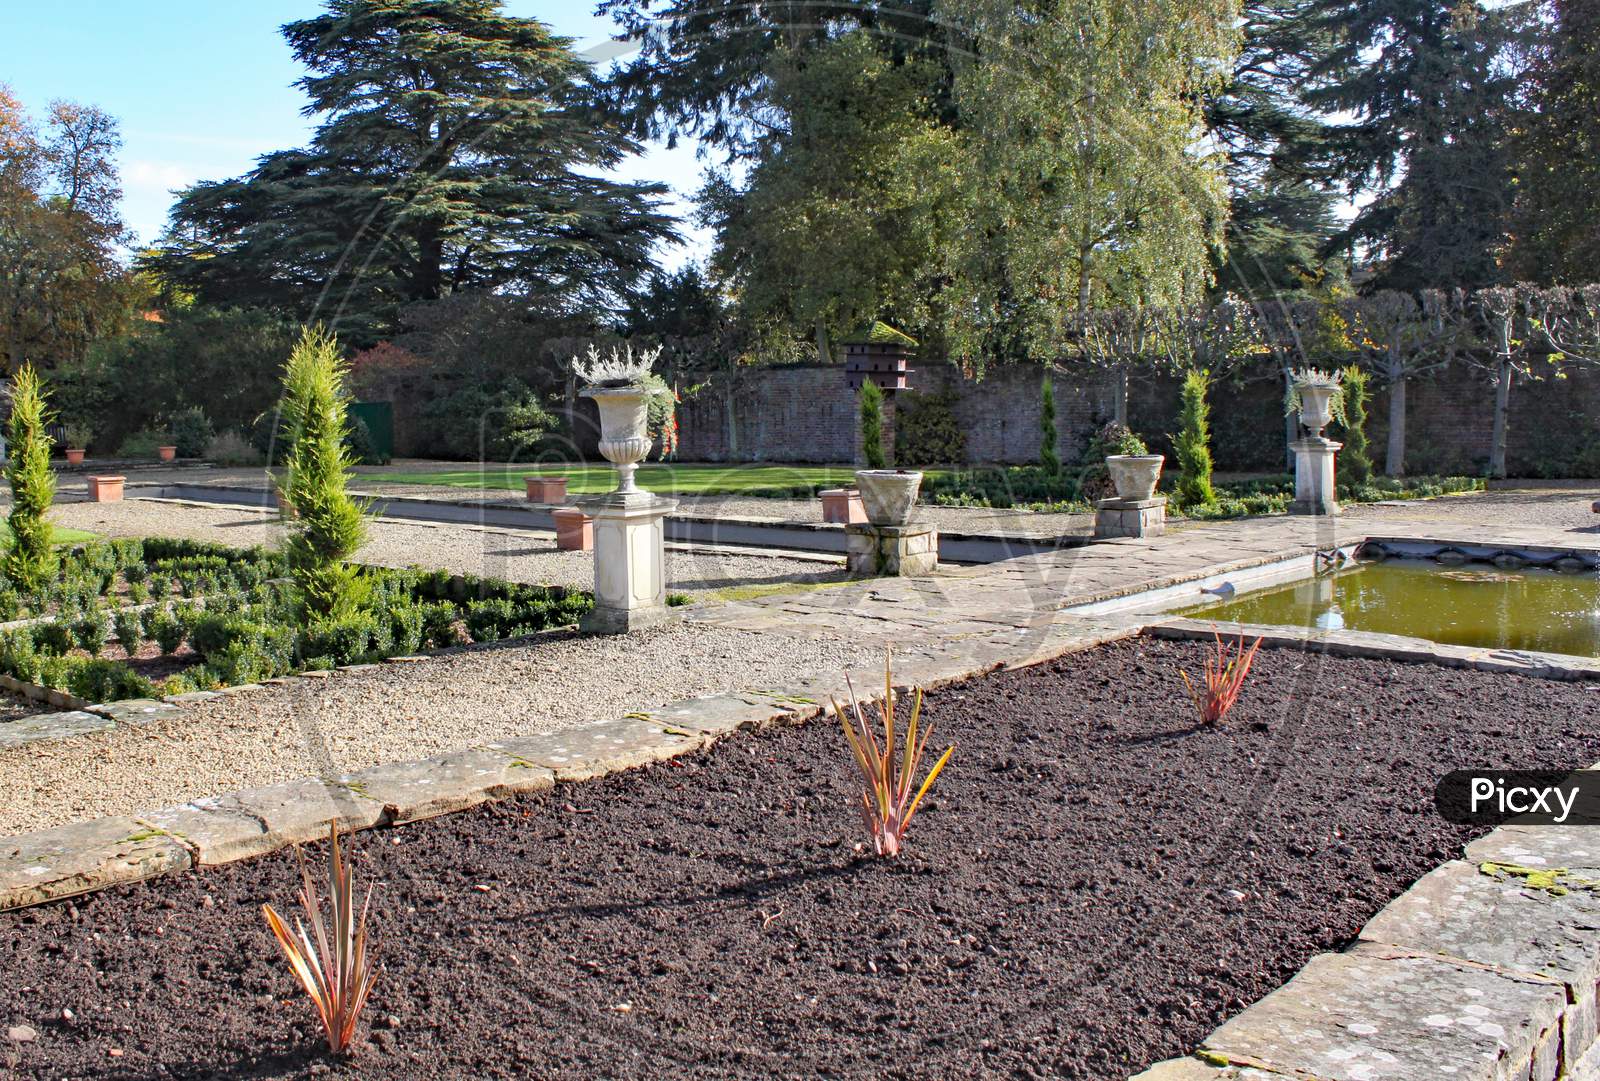 Empty Flower Beds Ready For Planting At Arley Arboretum In The Midlands In England.